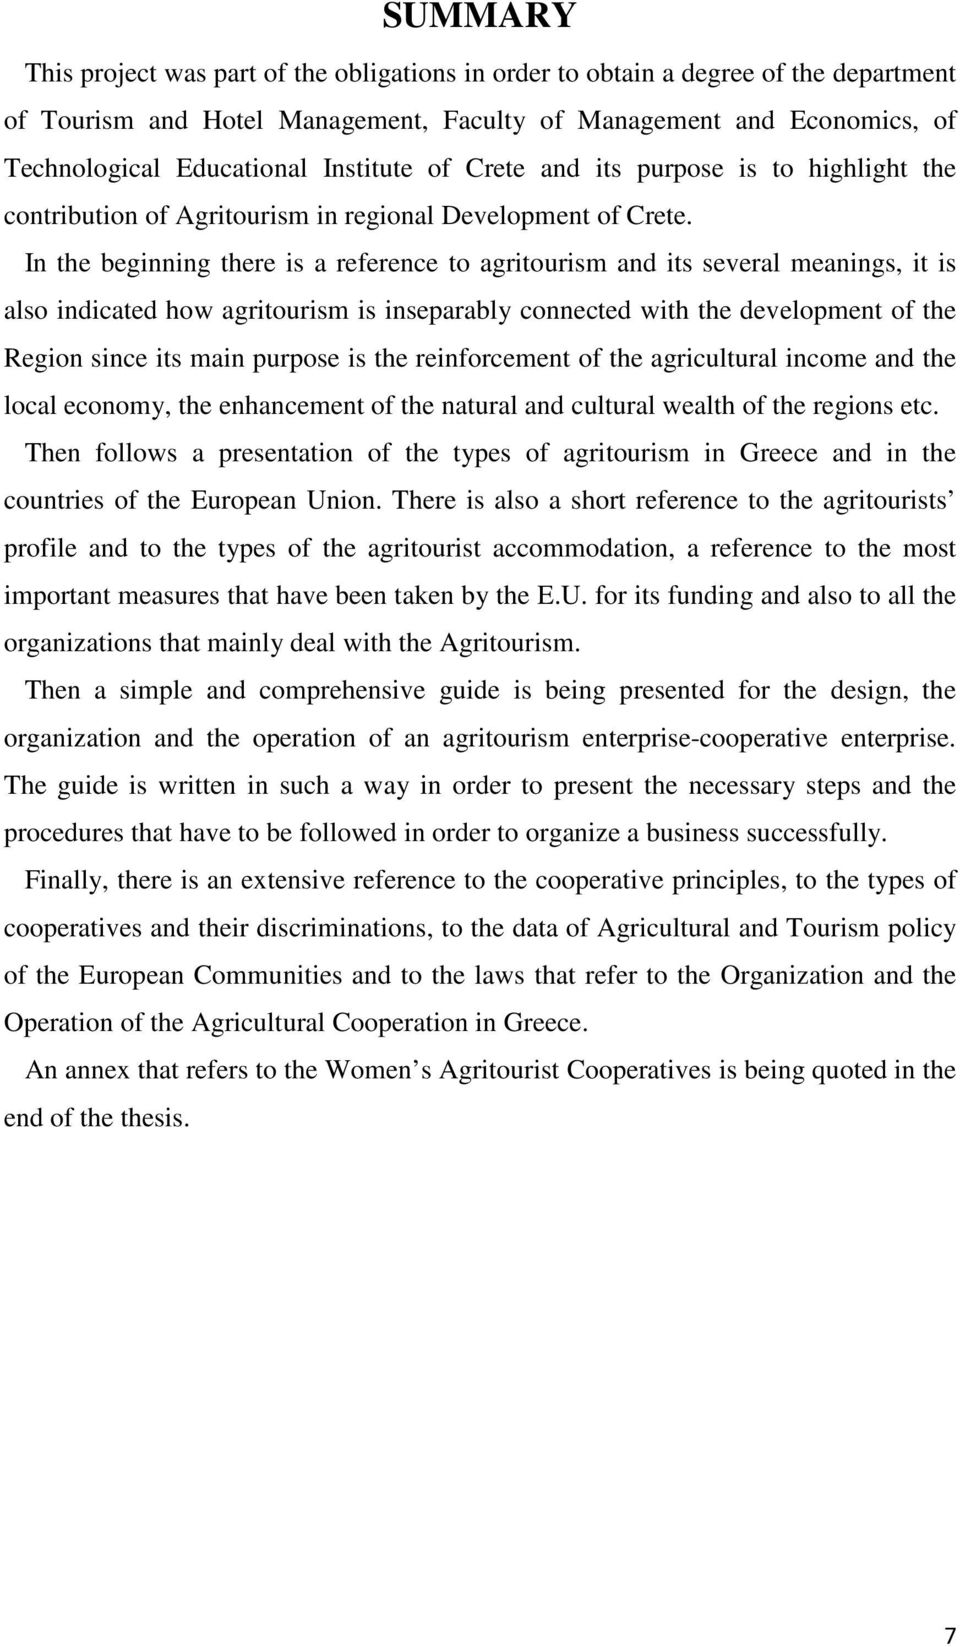 In the beginning there is a reference to agritourism and its several meanings, it is also indicated how agritourism is inseparably connected with the development of the Region since its main purpose